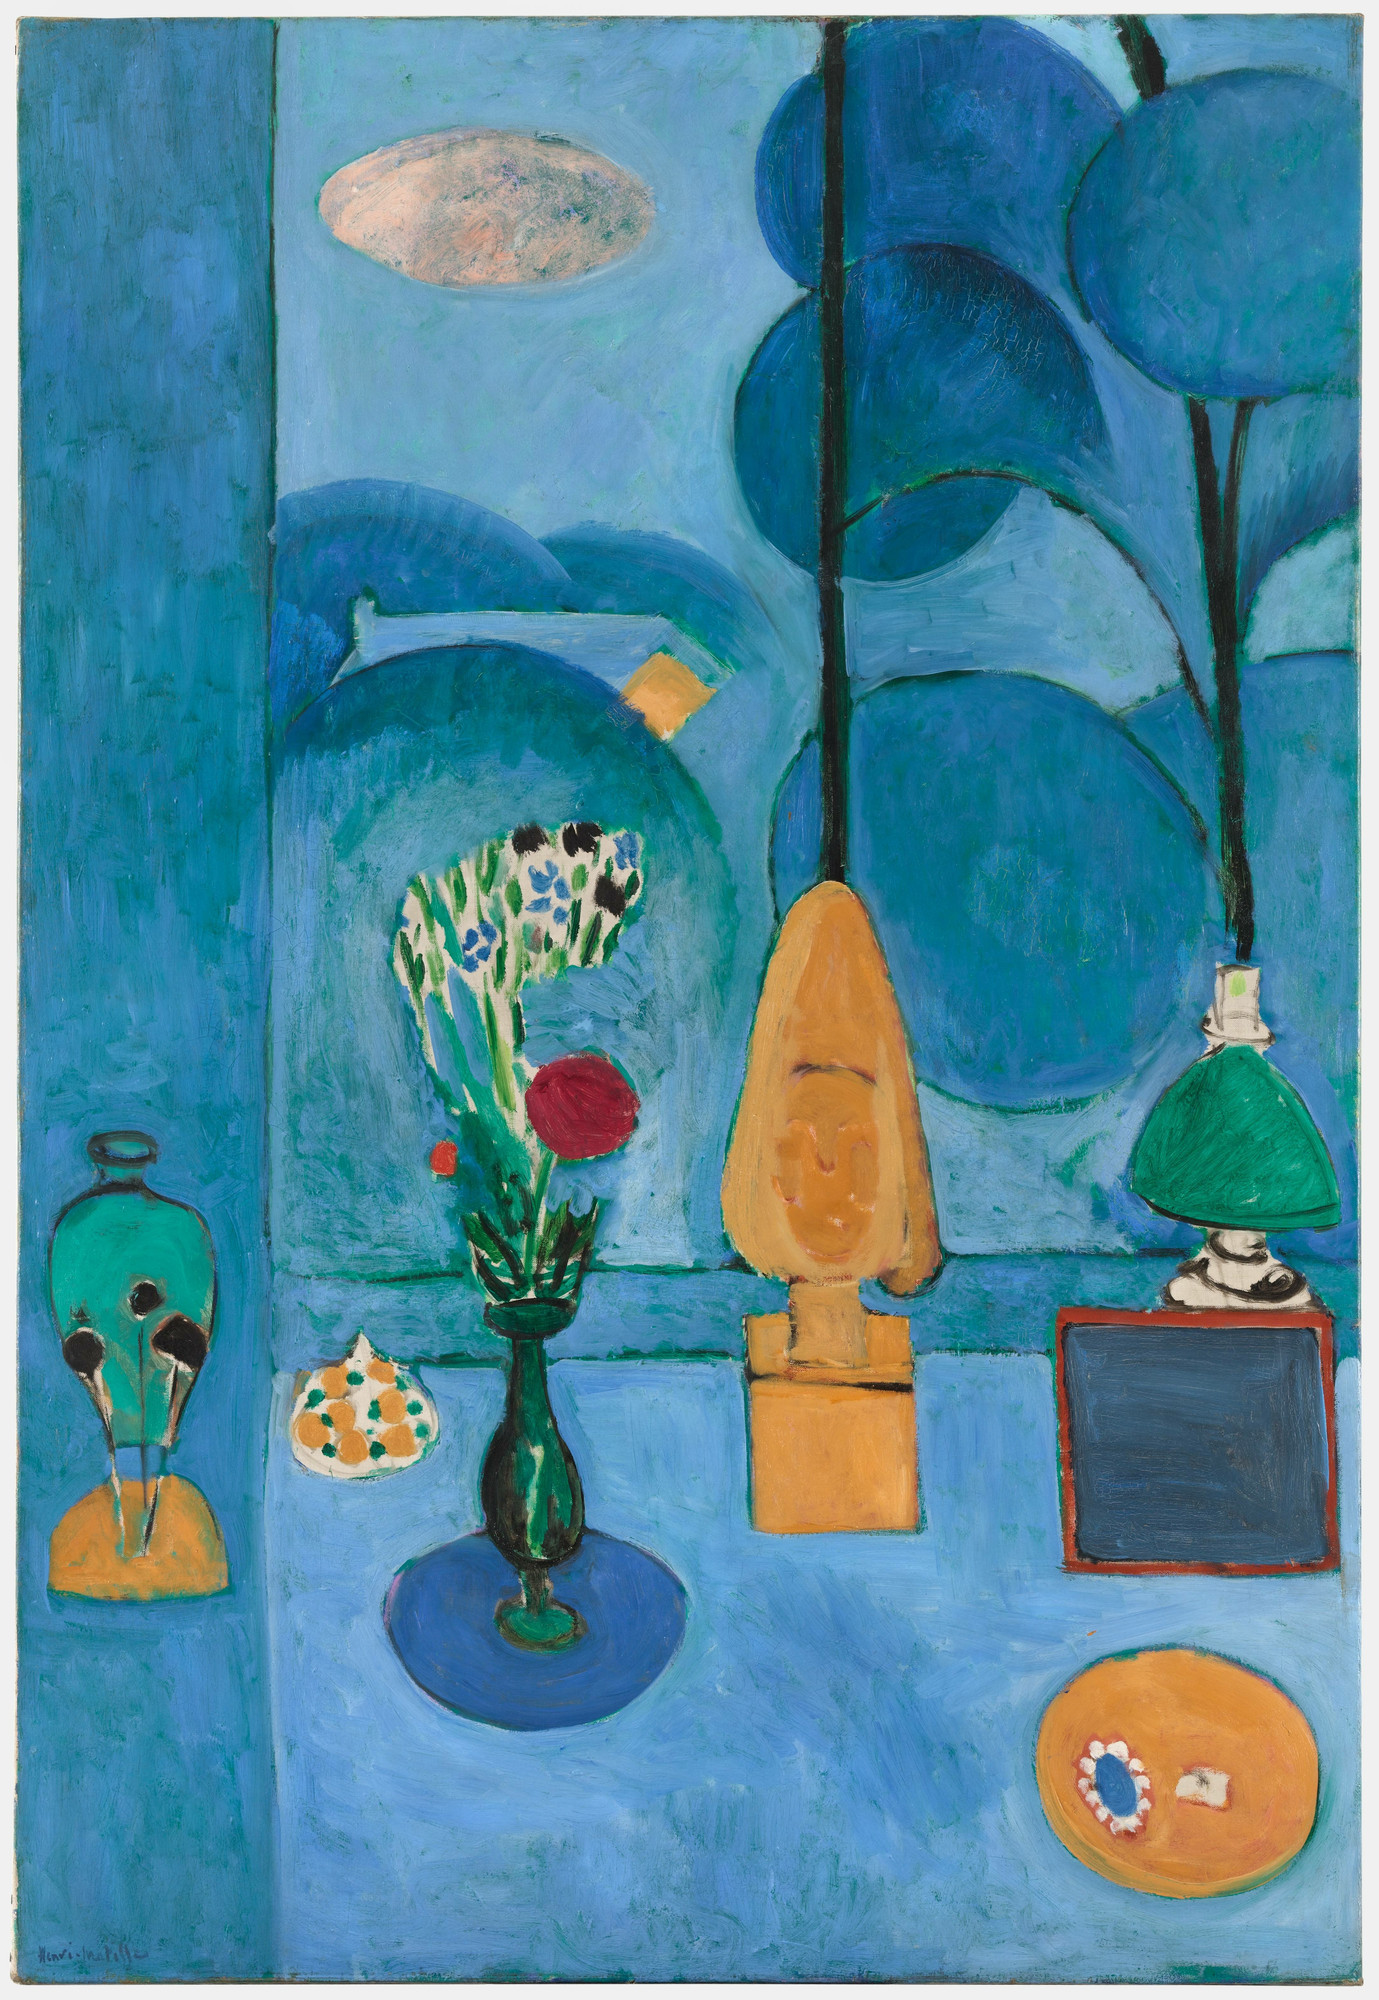 Henri Matisse. *The Blue Window*. 1913. Oil on canvas, 51 1/2 × 35 5/8ʺ (130.8 × 90.5 cm). The Museum of Modern Art, New York. Abby Aldrich Rockefeller Fund. © 2022 Succession H. Matisse / Artists Rights Society (ARS), New York